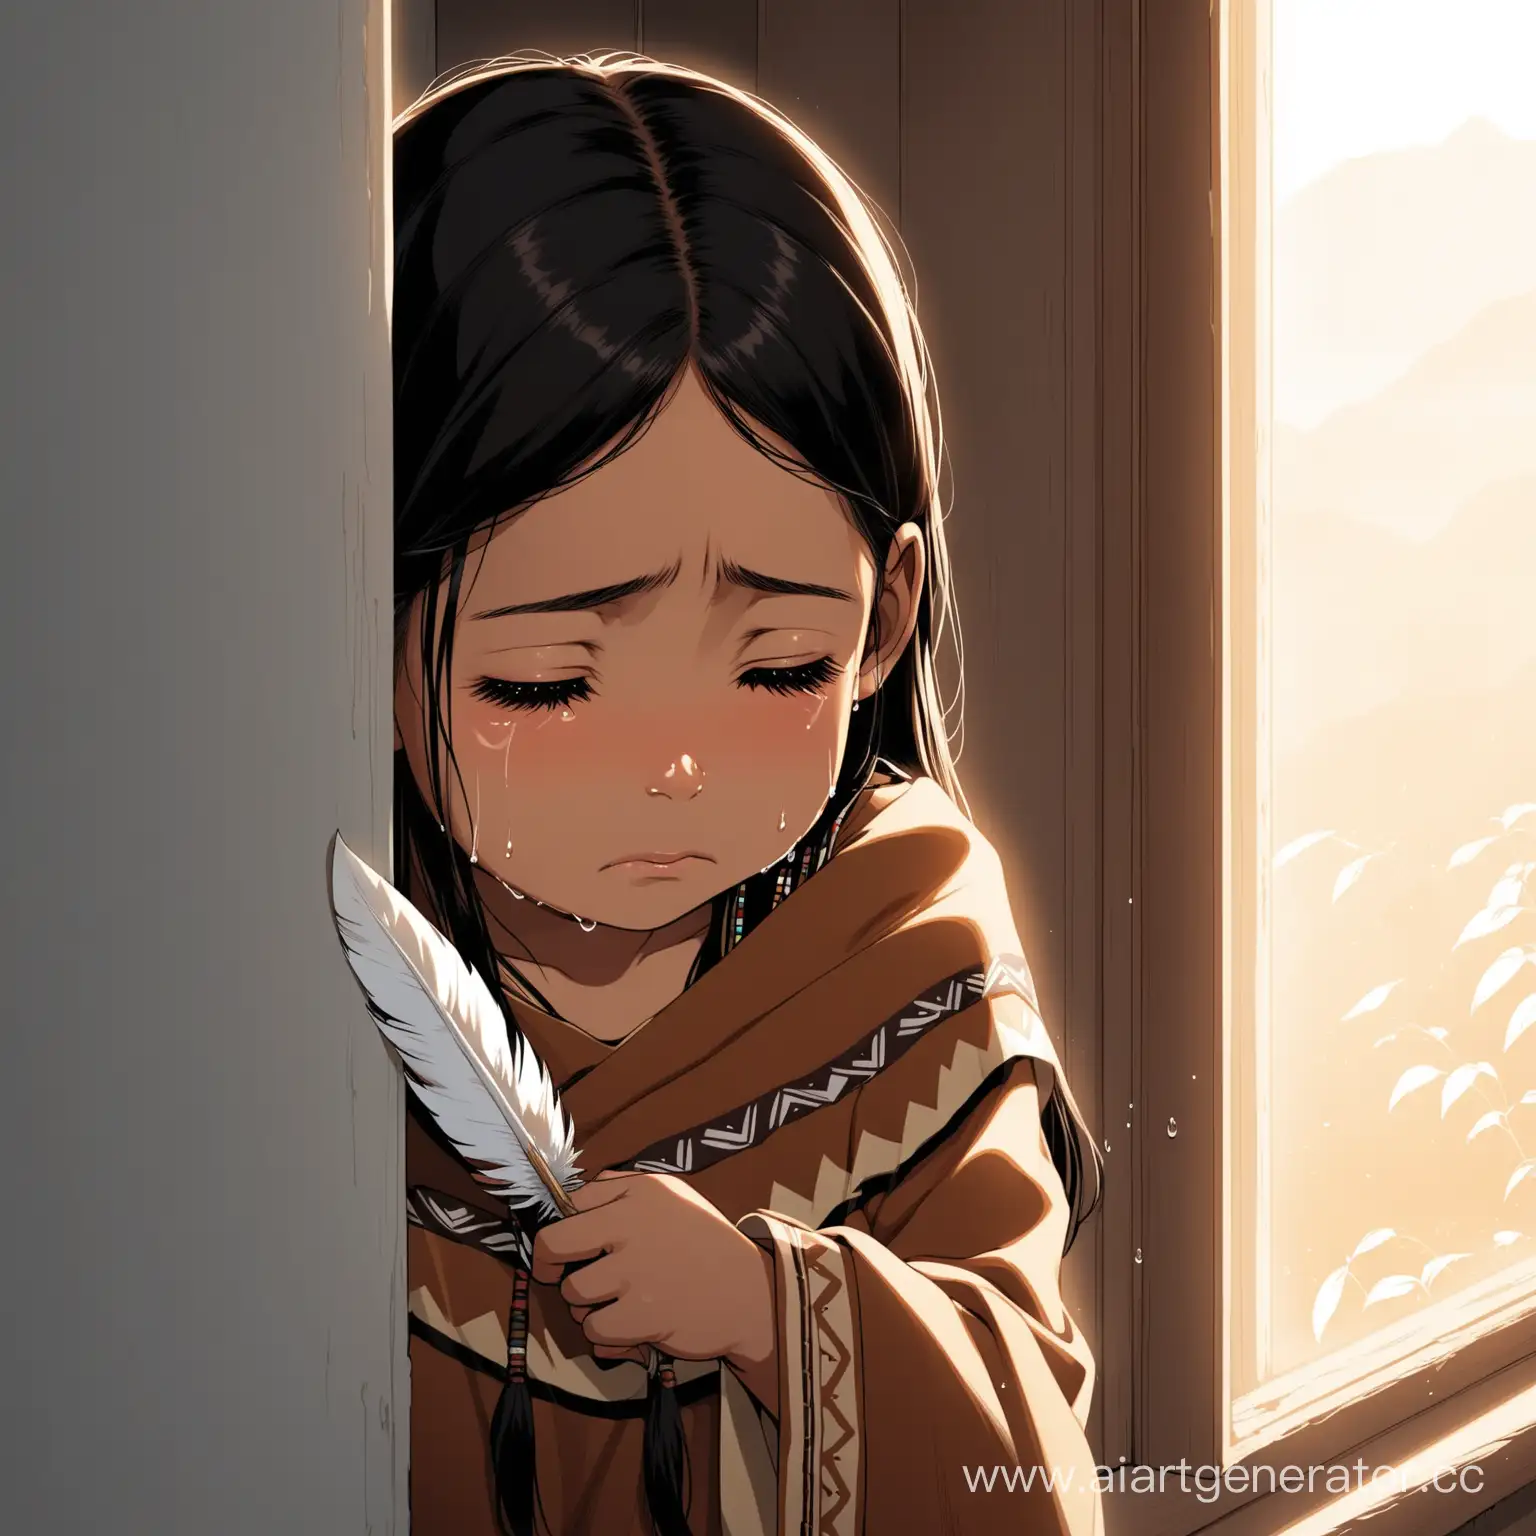 An indigenous girl is crying aloneholding an eagle feather near the window in the corner, 